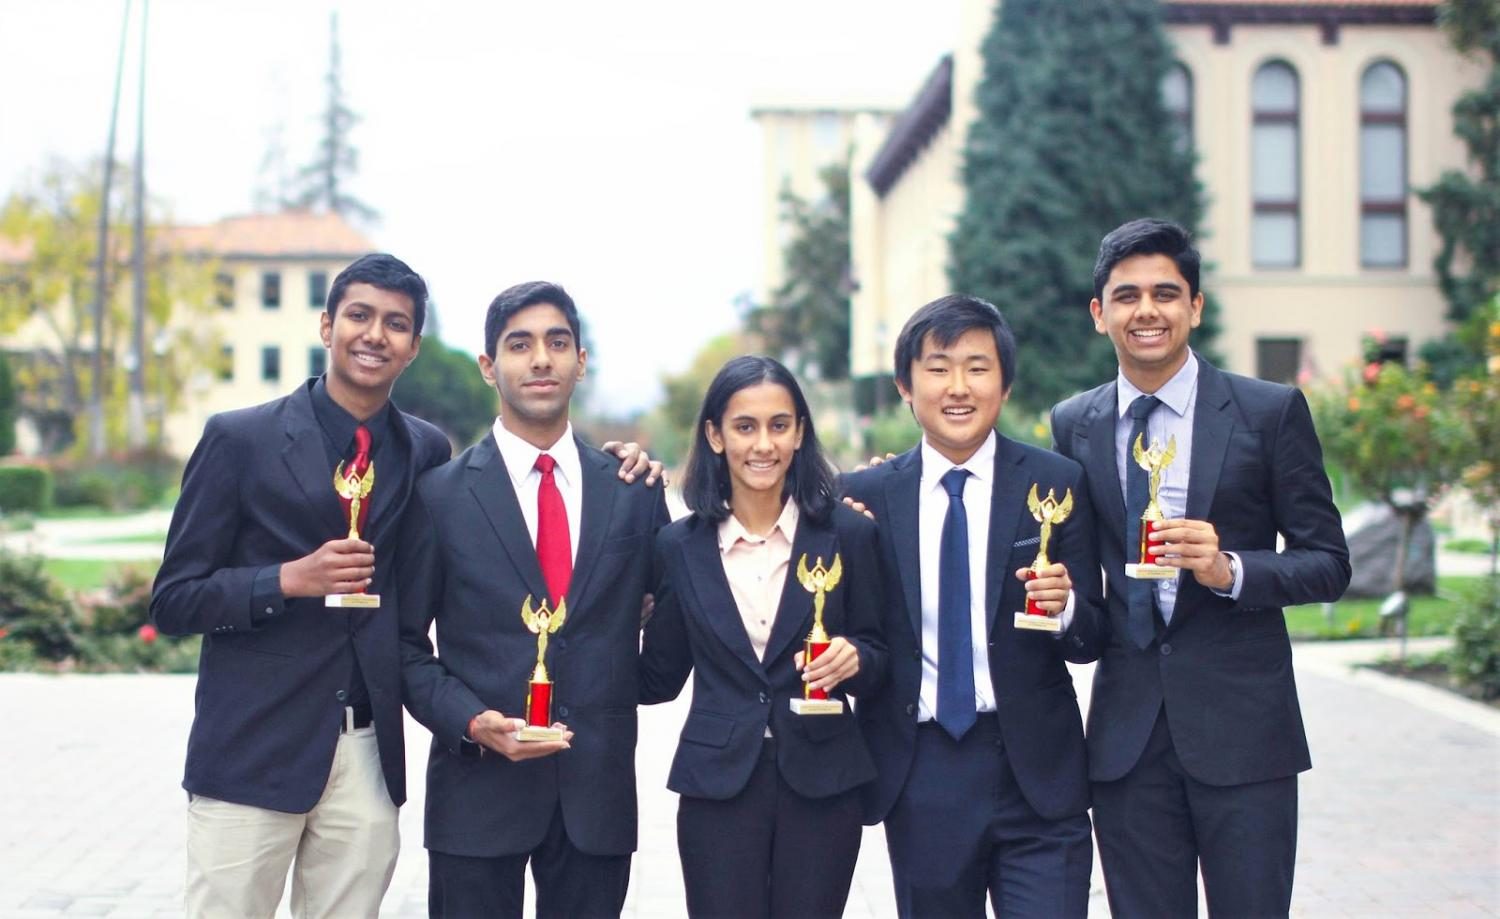 Sampreeth Moturi (12) and Rachit Pareek (11) as well as William Yoo (11) and Rishabh Meswani (12) were octo finalists in Parliamentary Open, meaning that they placed in the top 16. Akanksha Jain (12) was also an octofinalist in Lincoln-Douglas Open.